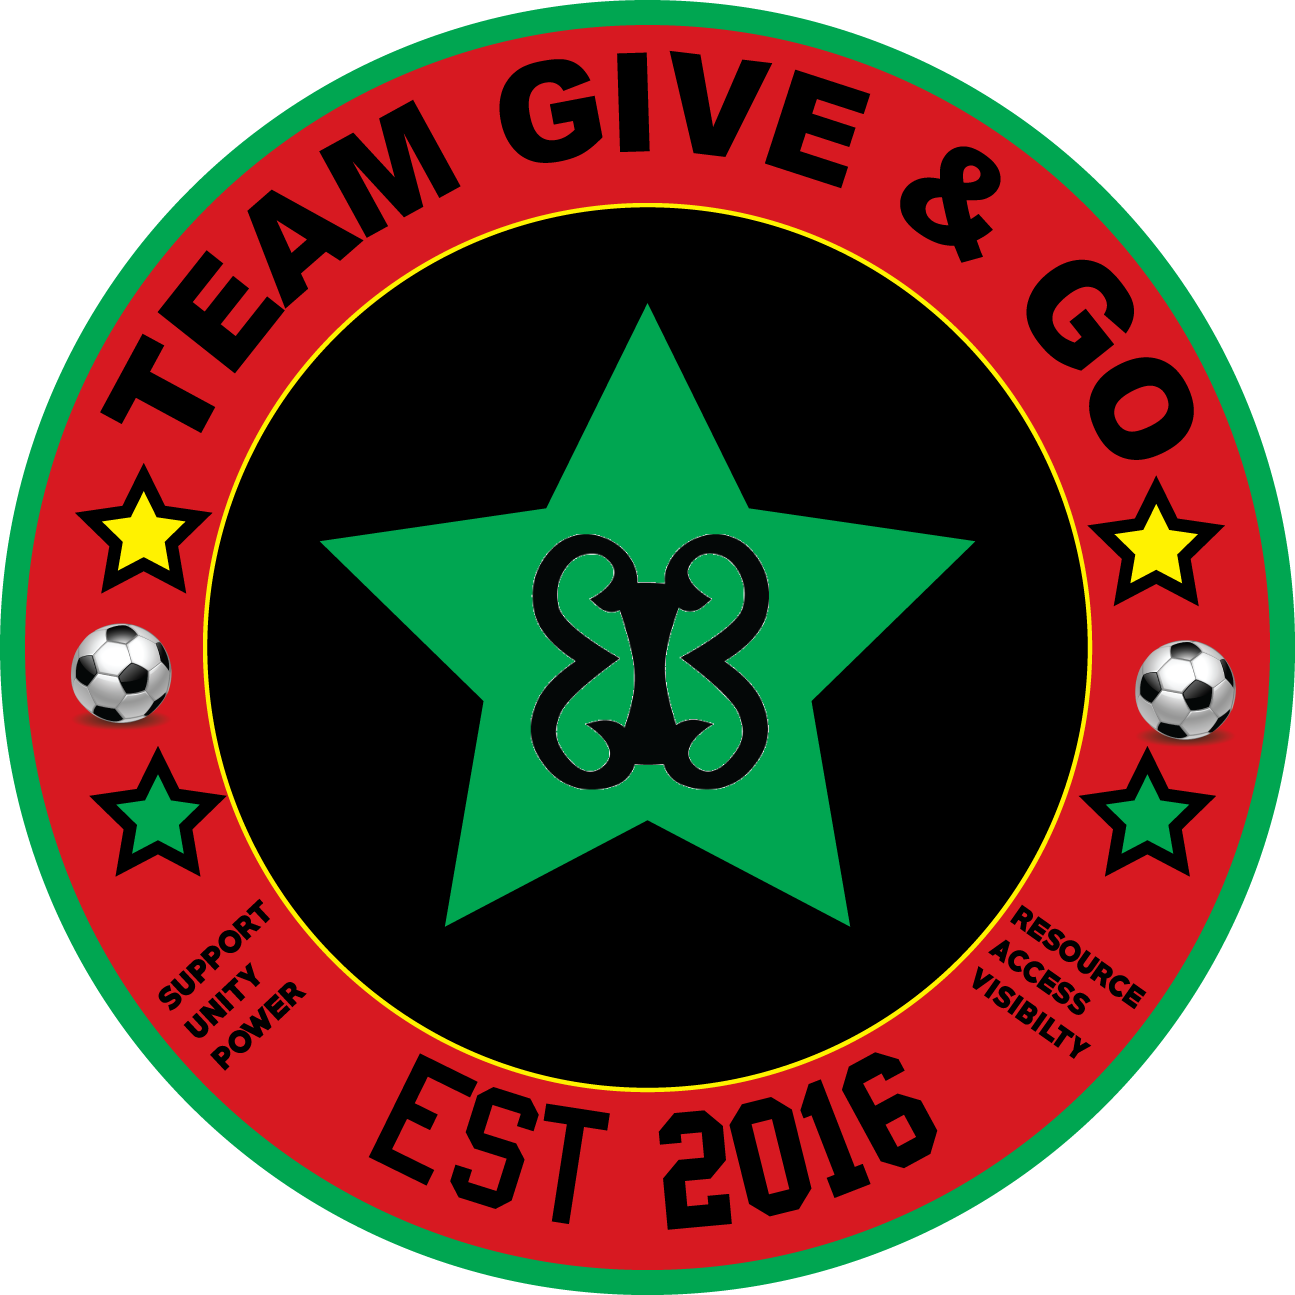 Team Give And Go 